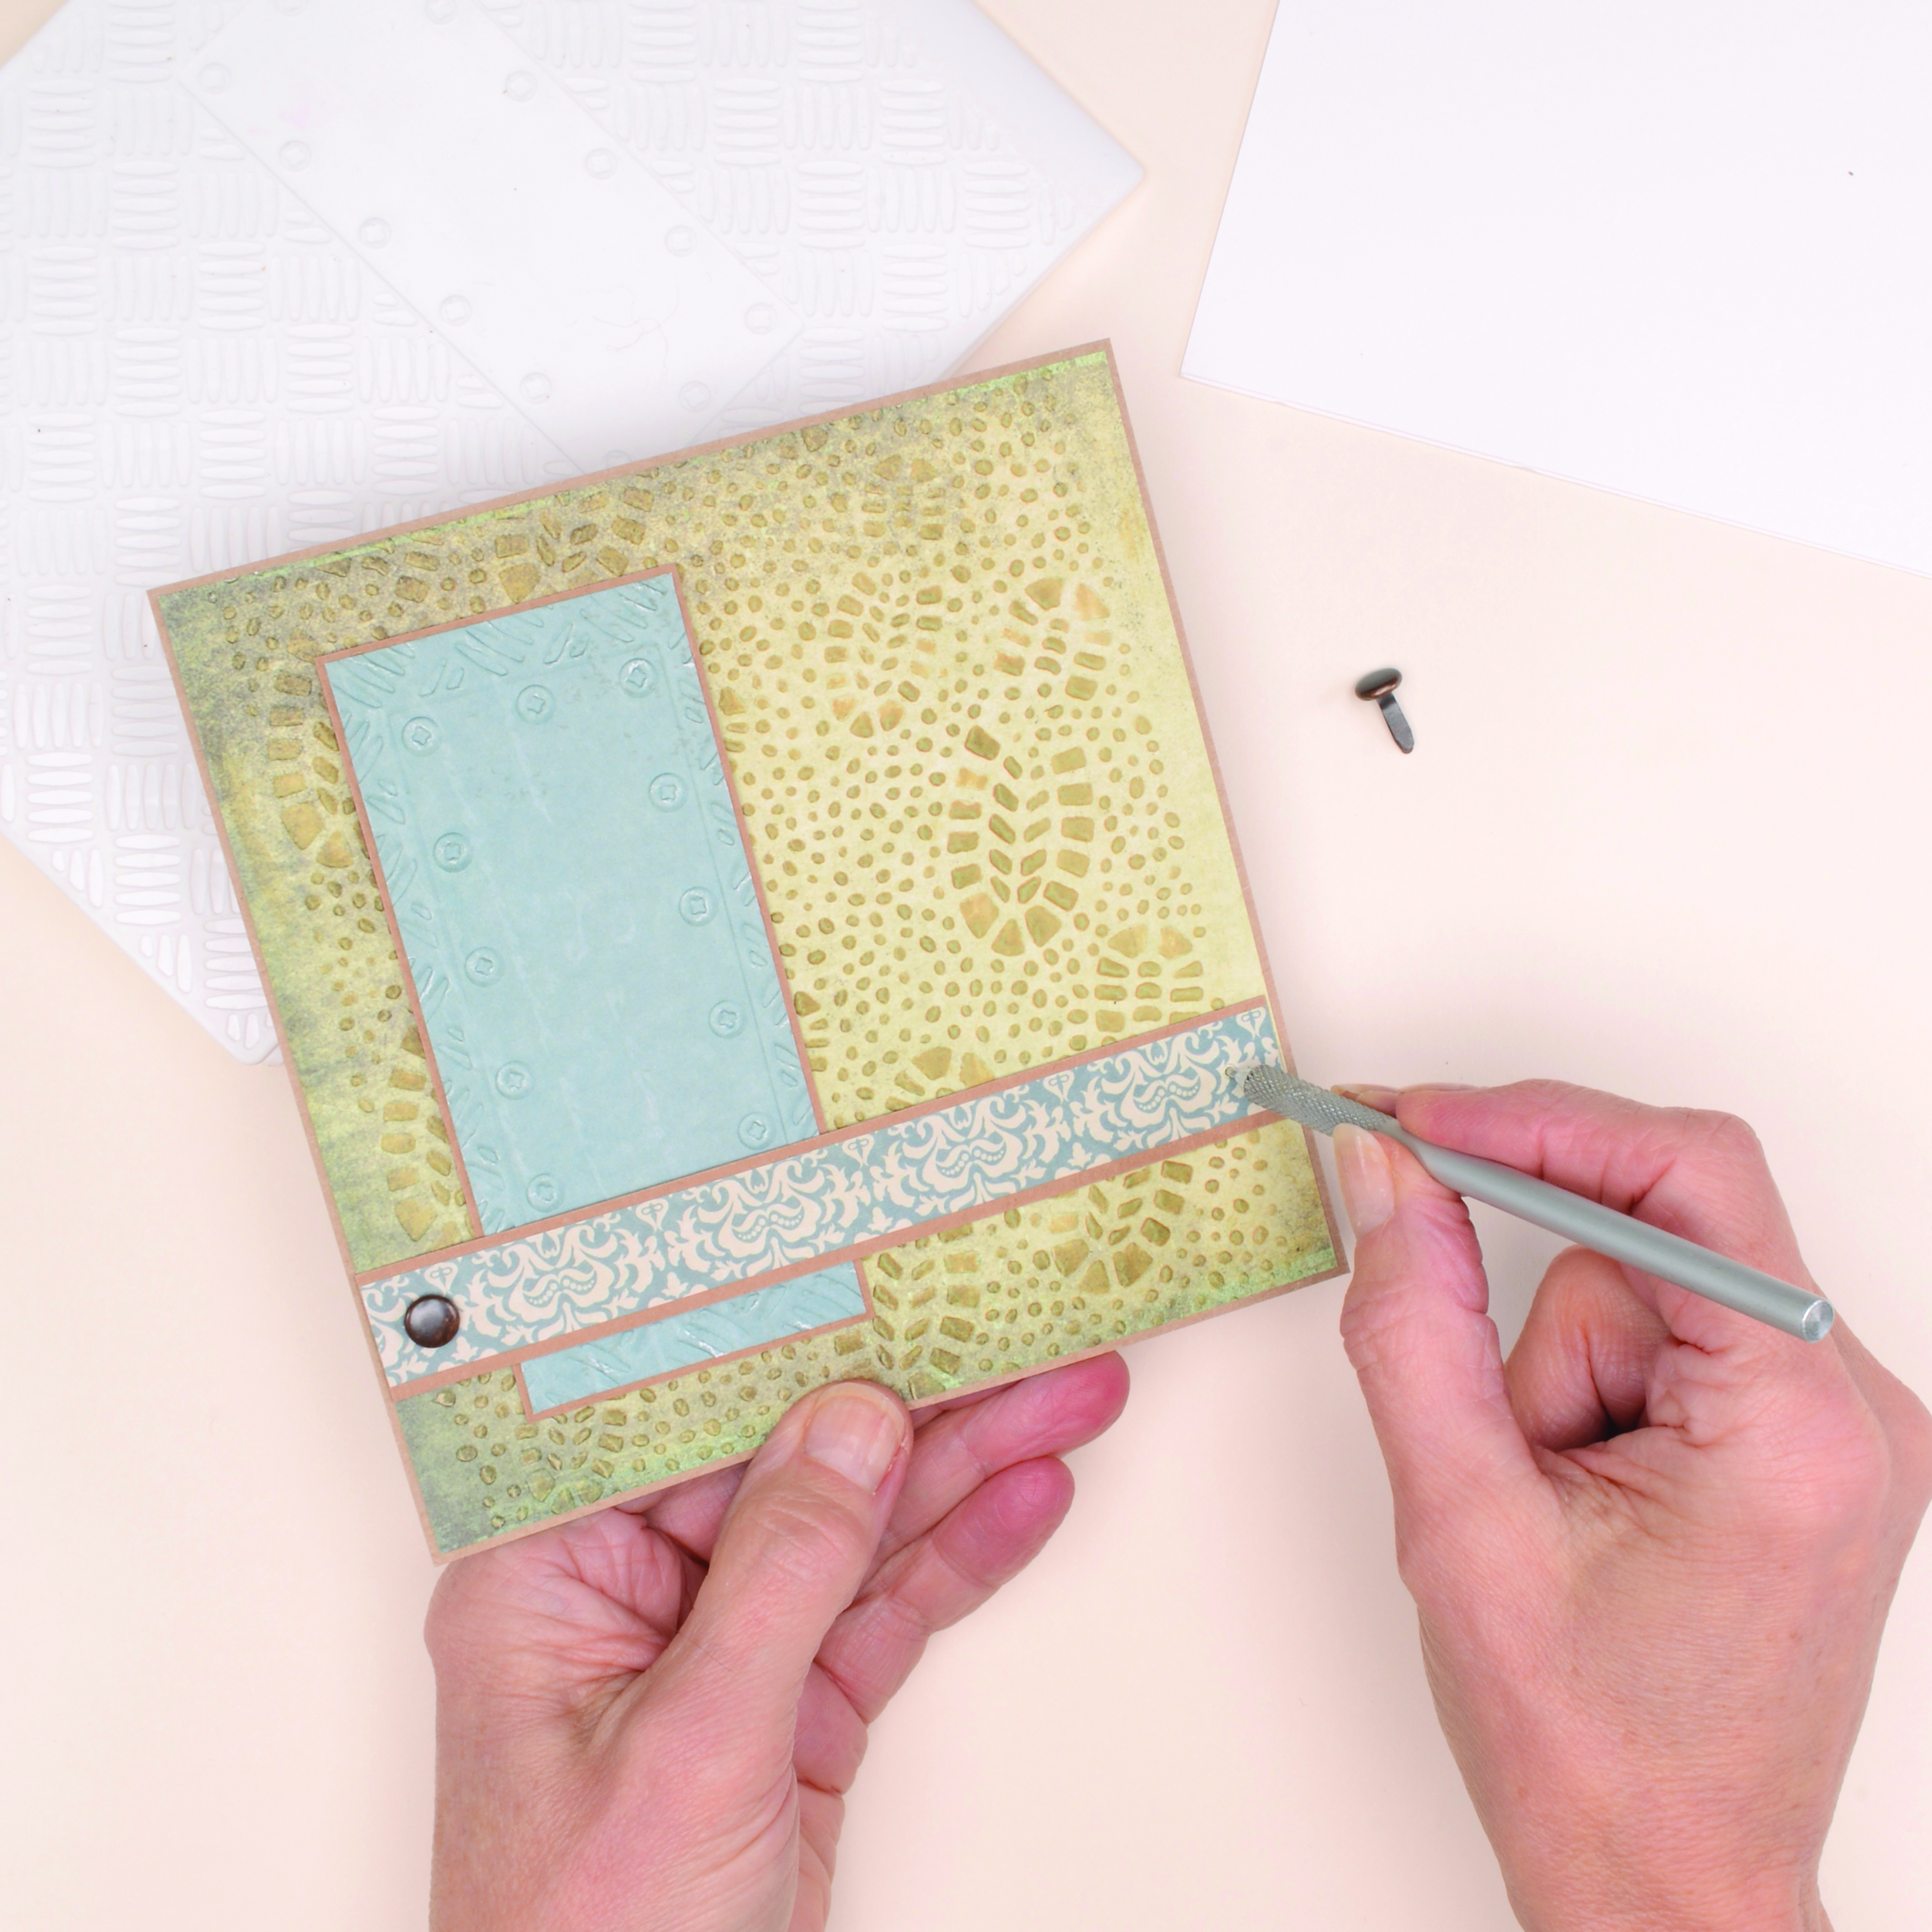 How to make a waterfall card – step 2